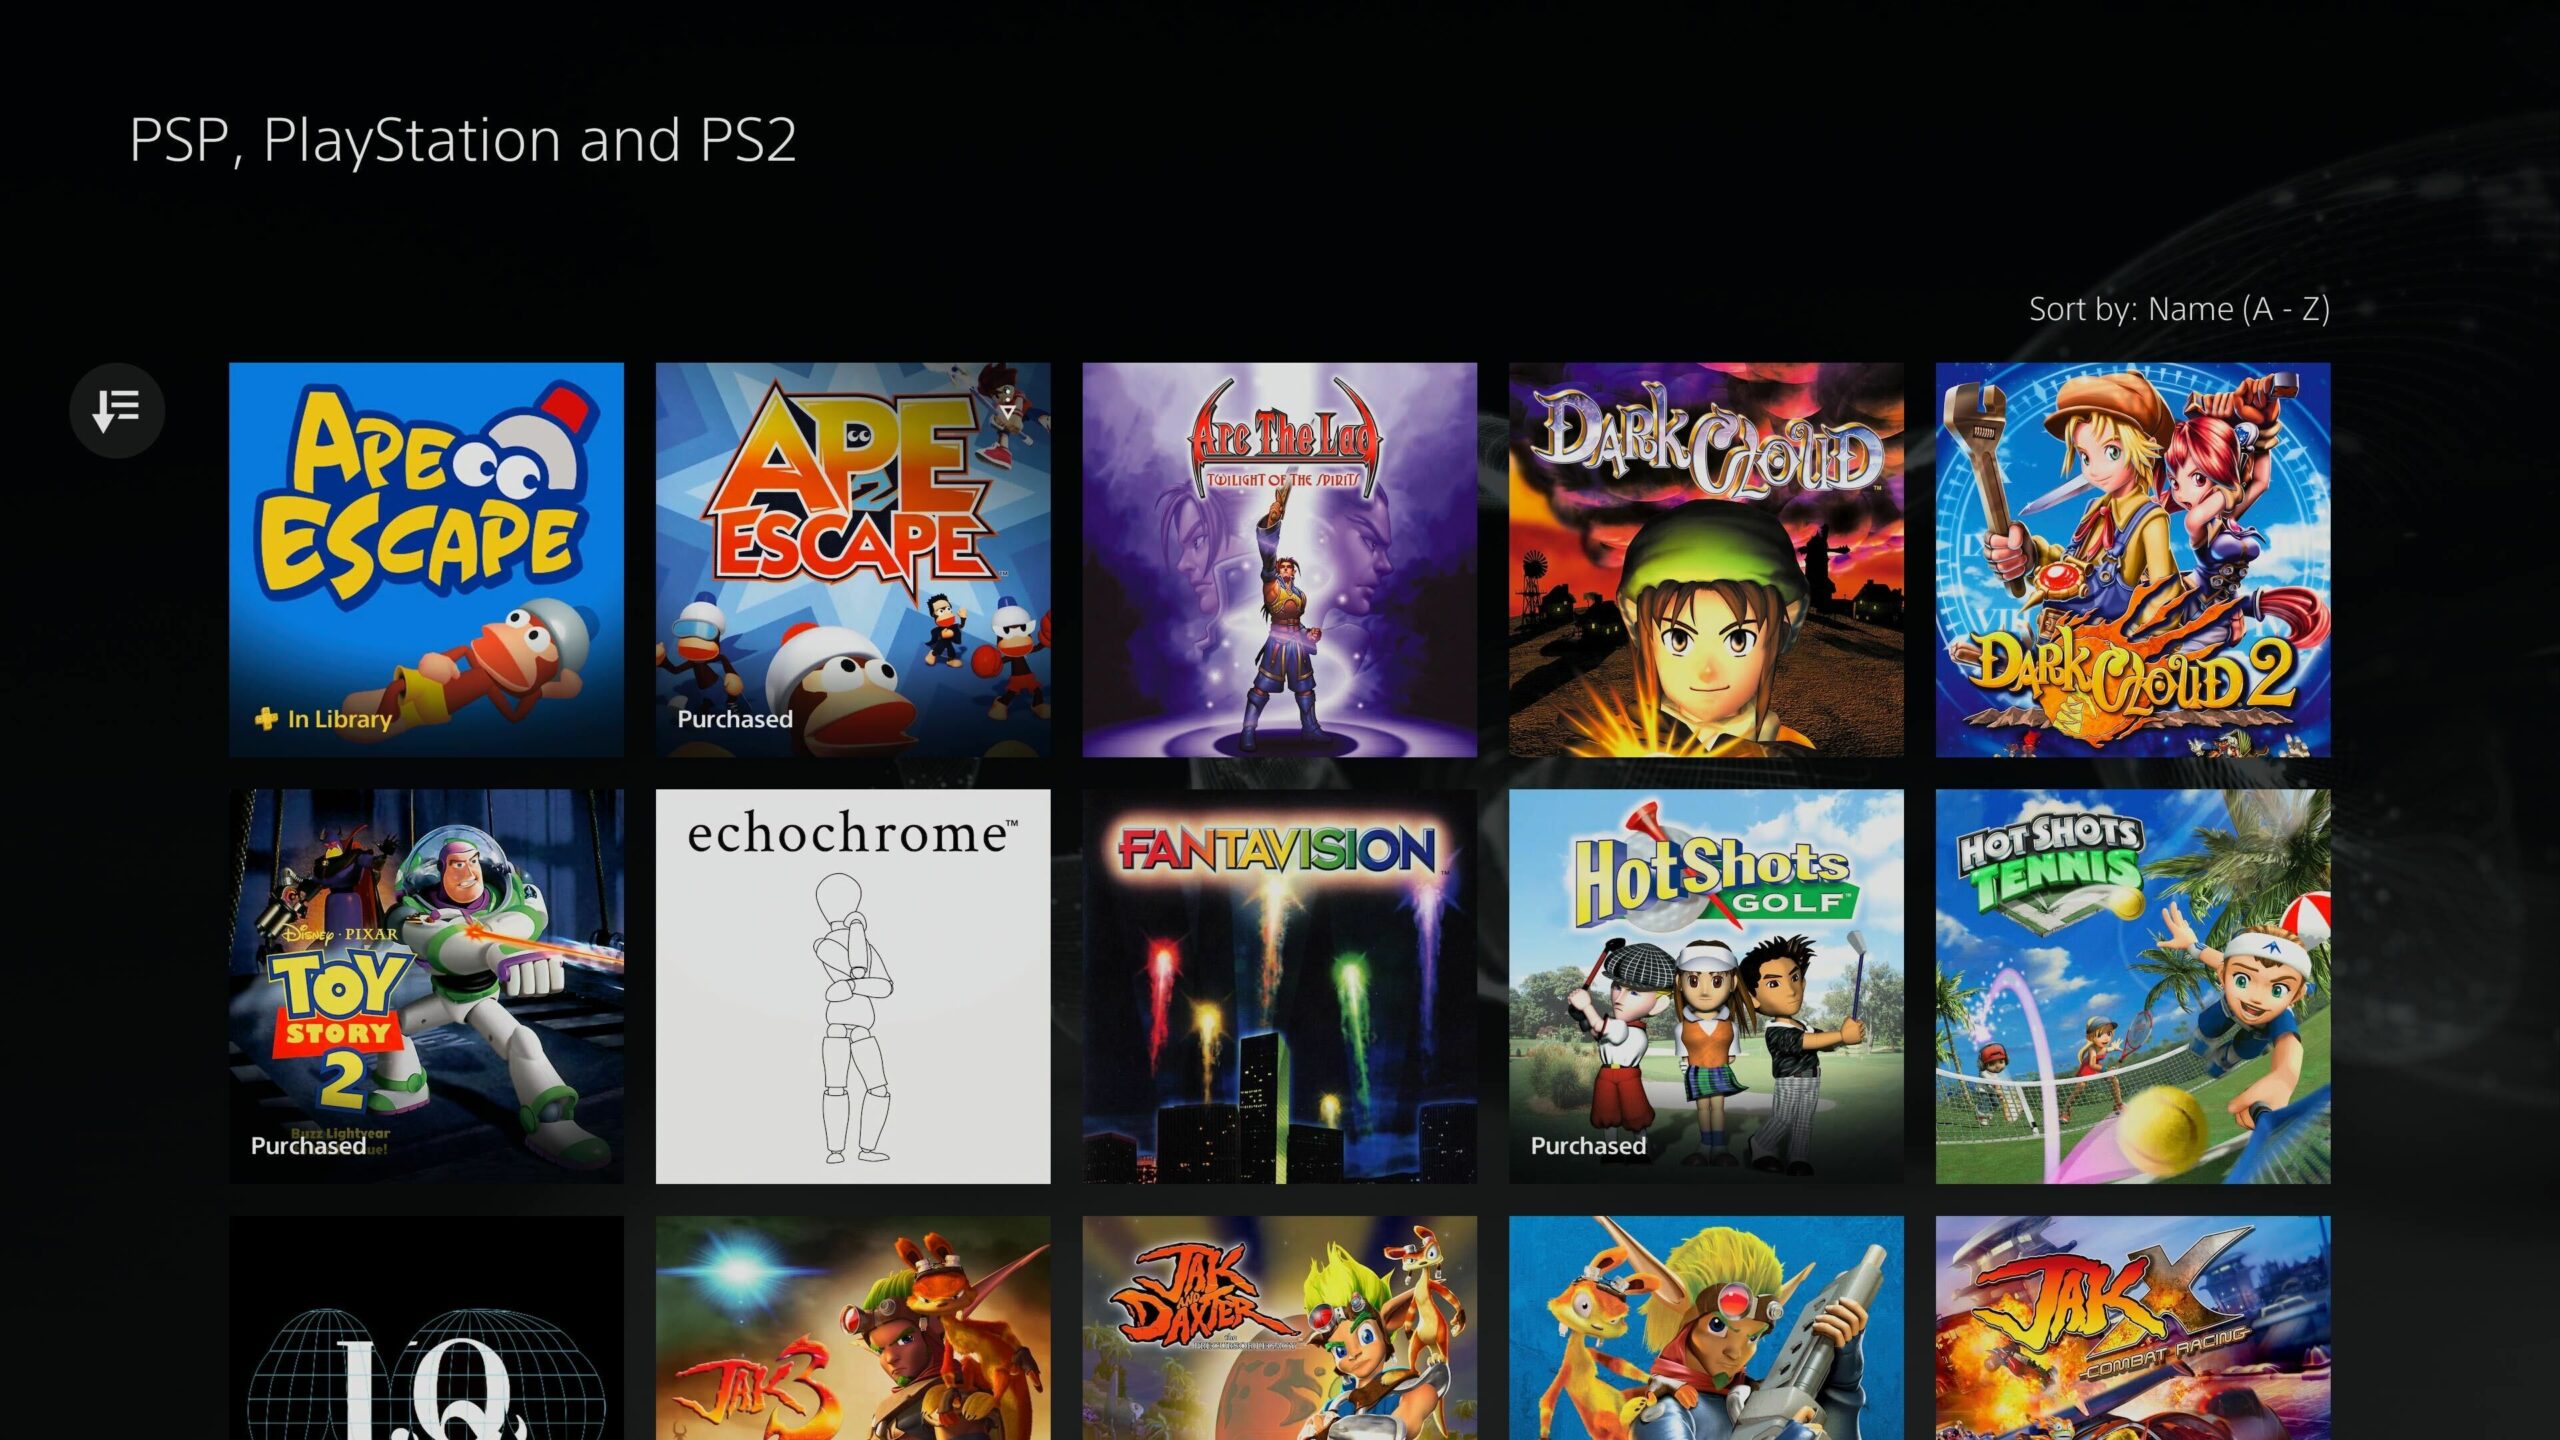 A screenshot of PS Plus retro games on the PS Store, including Ape Escape, Dark Cloud and Jak and Daxter.